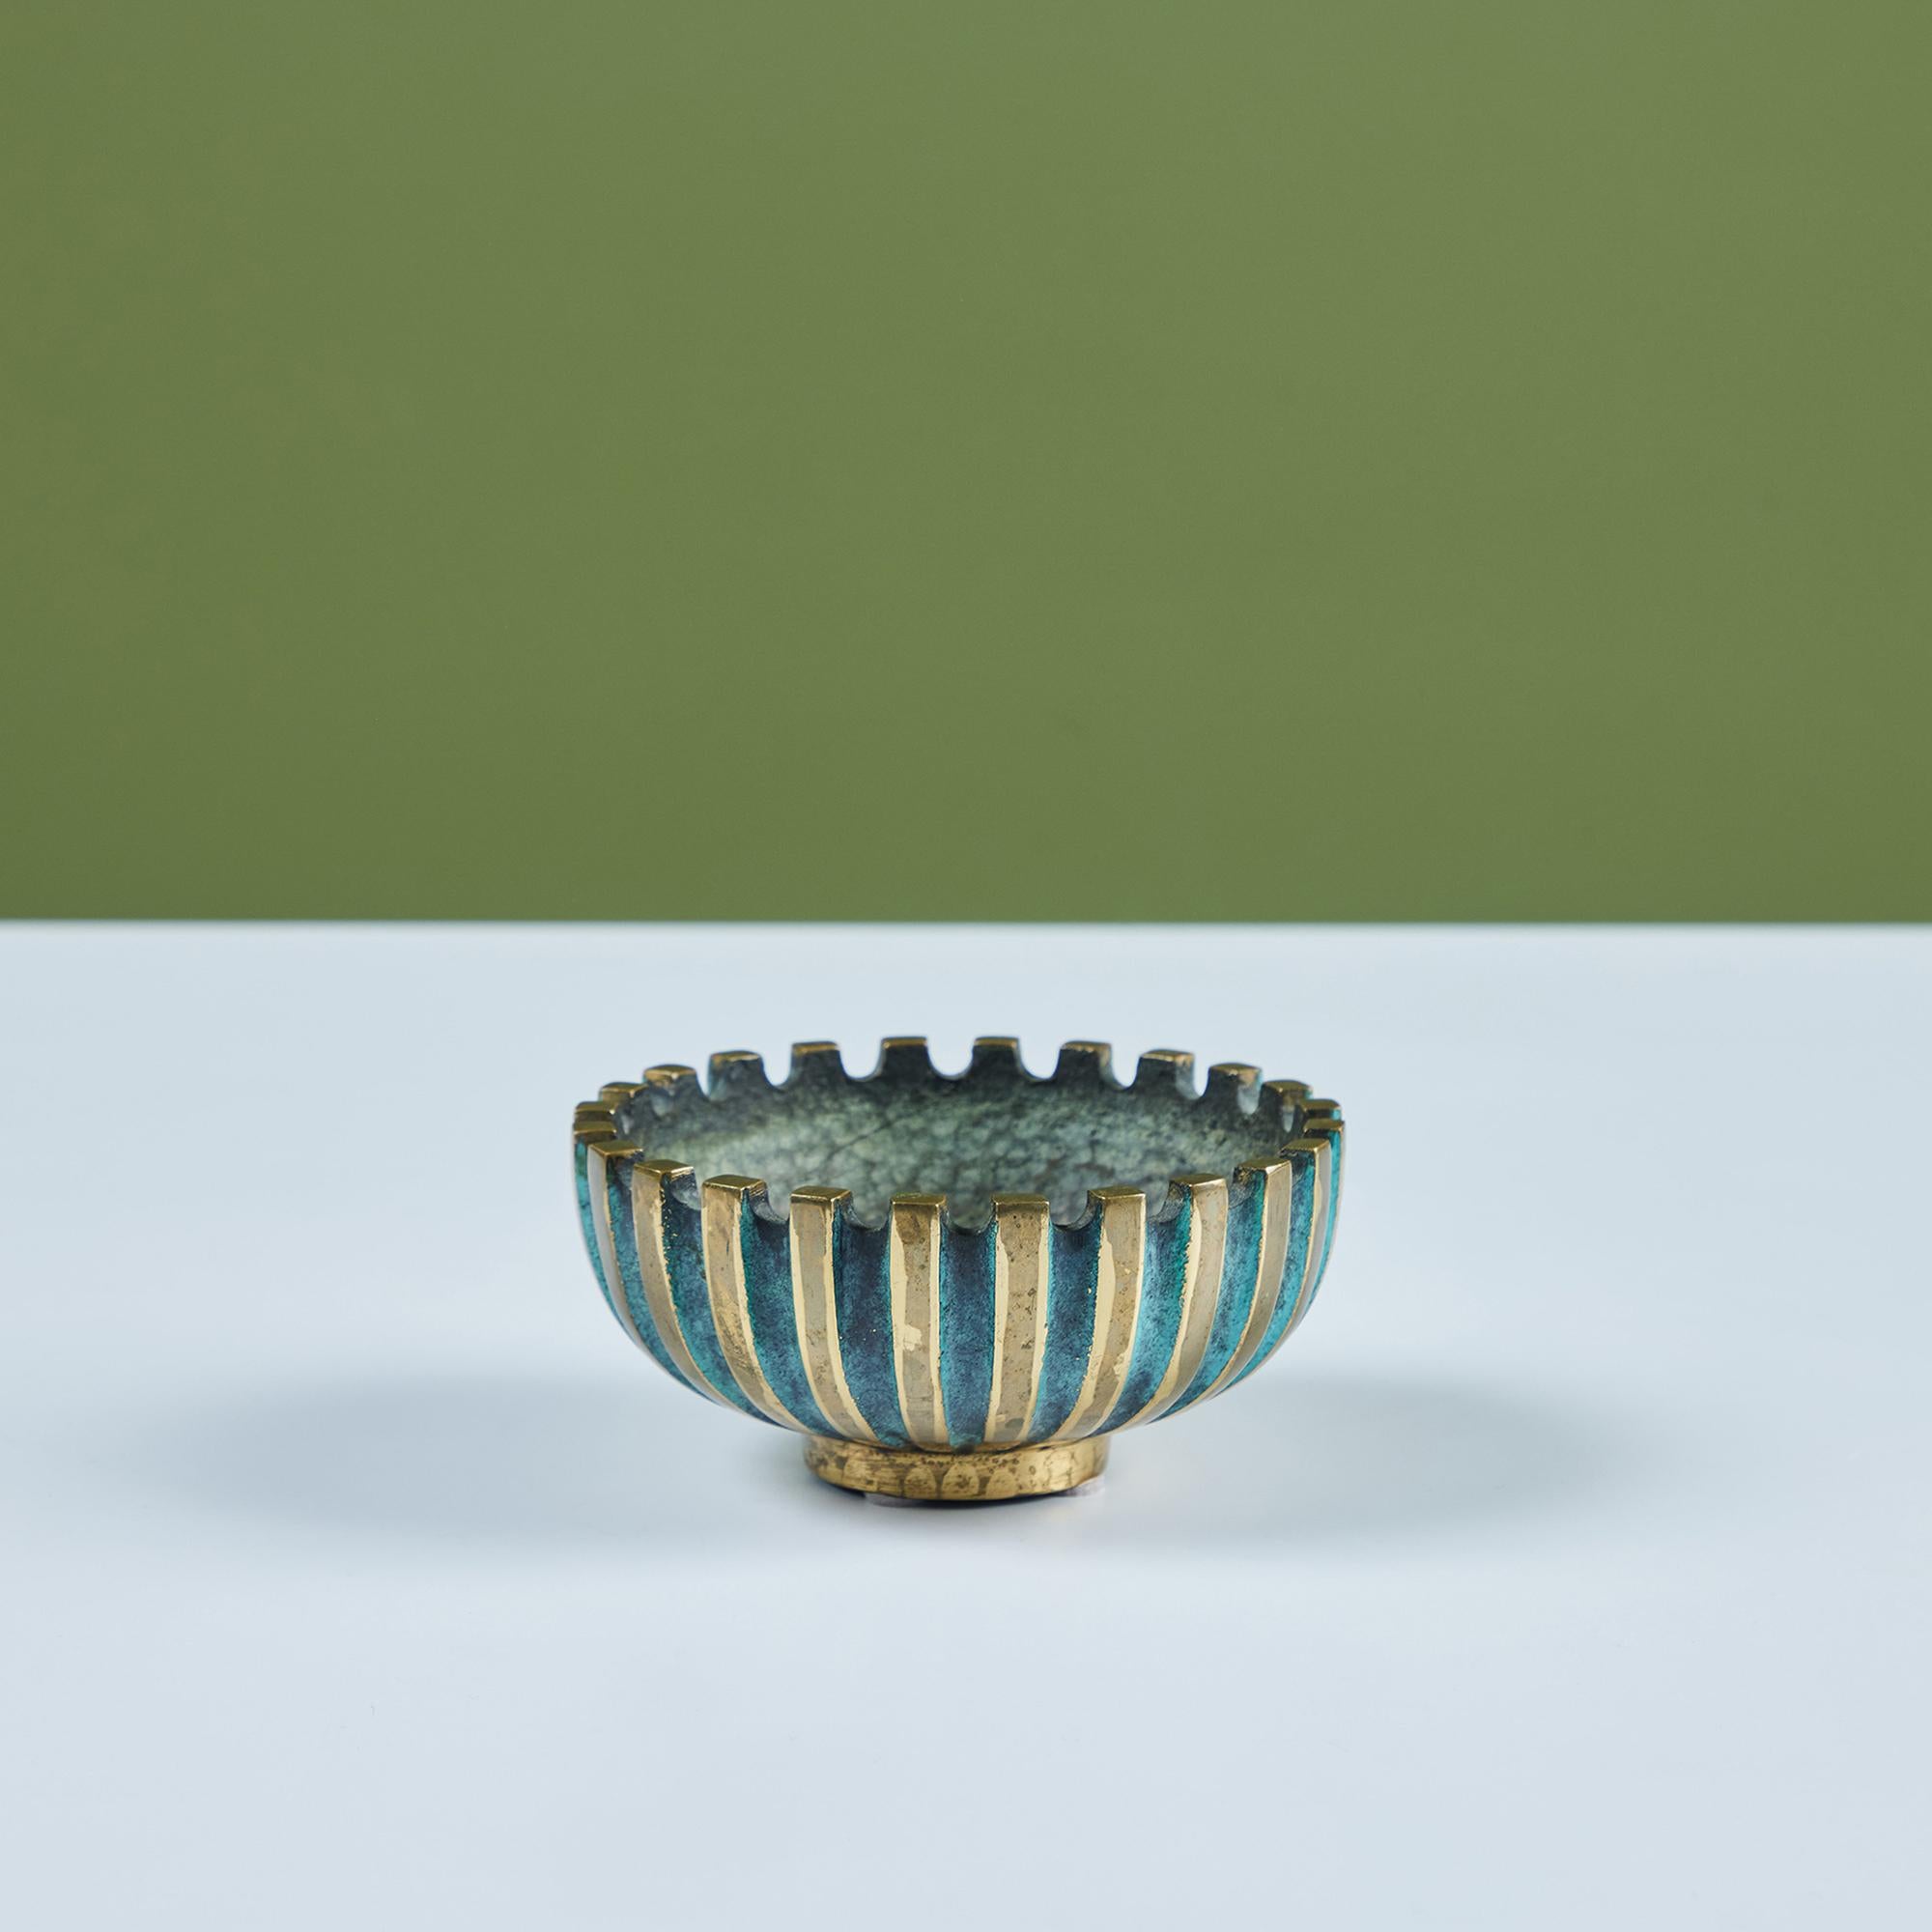 Mid-century cast bronze Pal Bell bowl. Features indented, ribbed exterior with alternating patinated bronze and verdigris stripes. The interior has a hand-hammered texture. An embossed stamp on the underside reads Pal-Bell Co. Made in